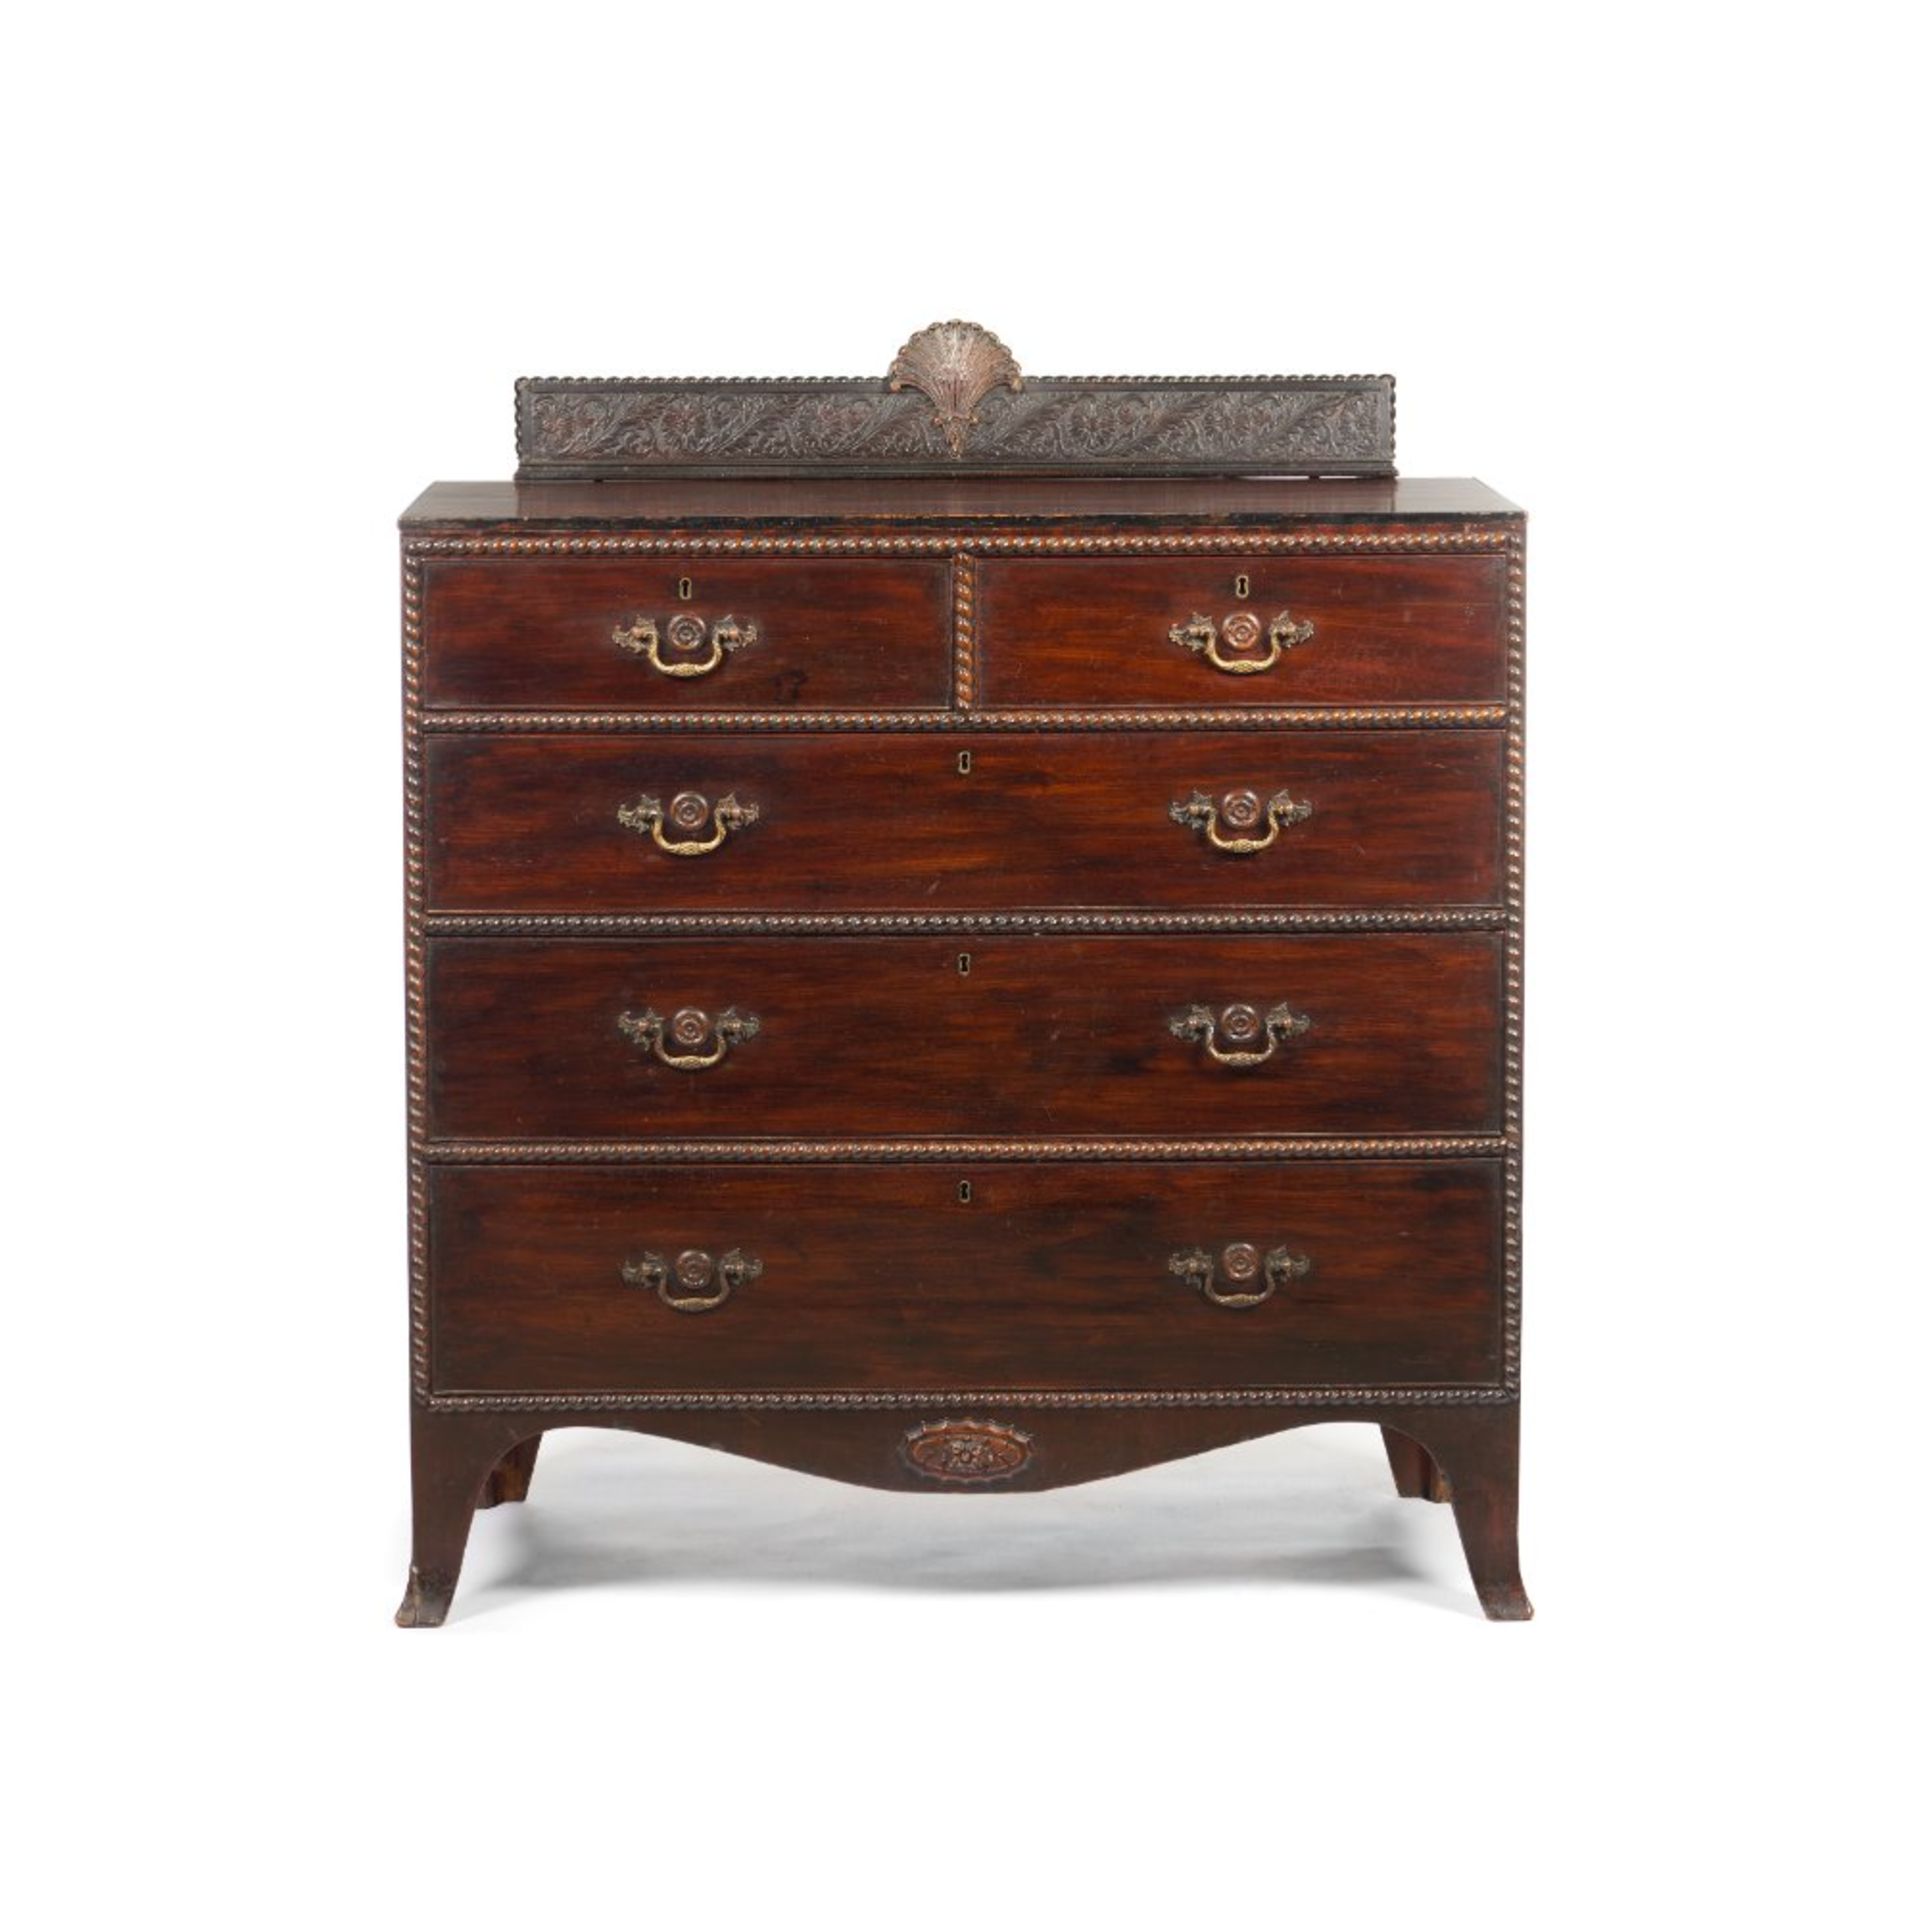 A George III style chest of drawers